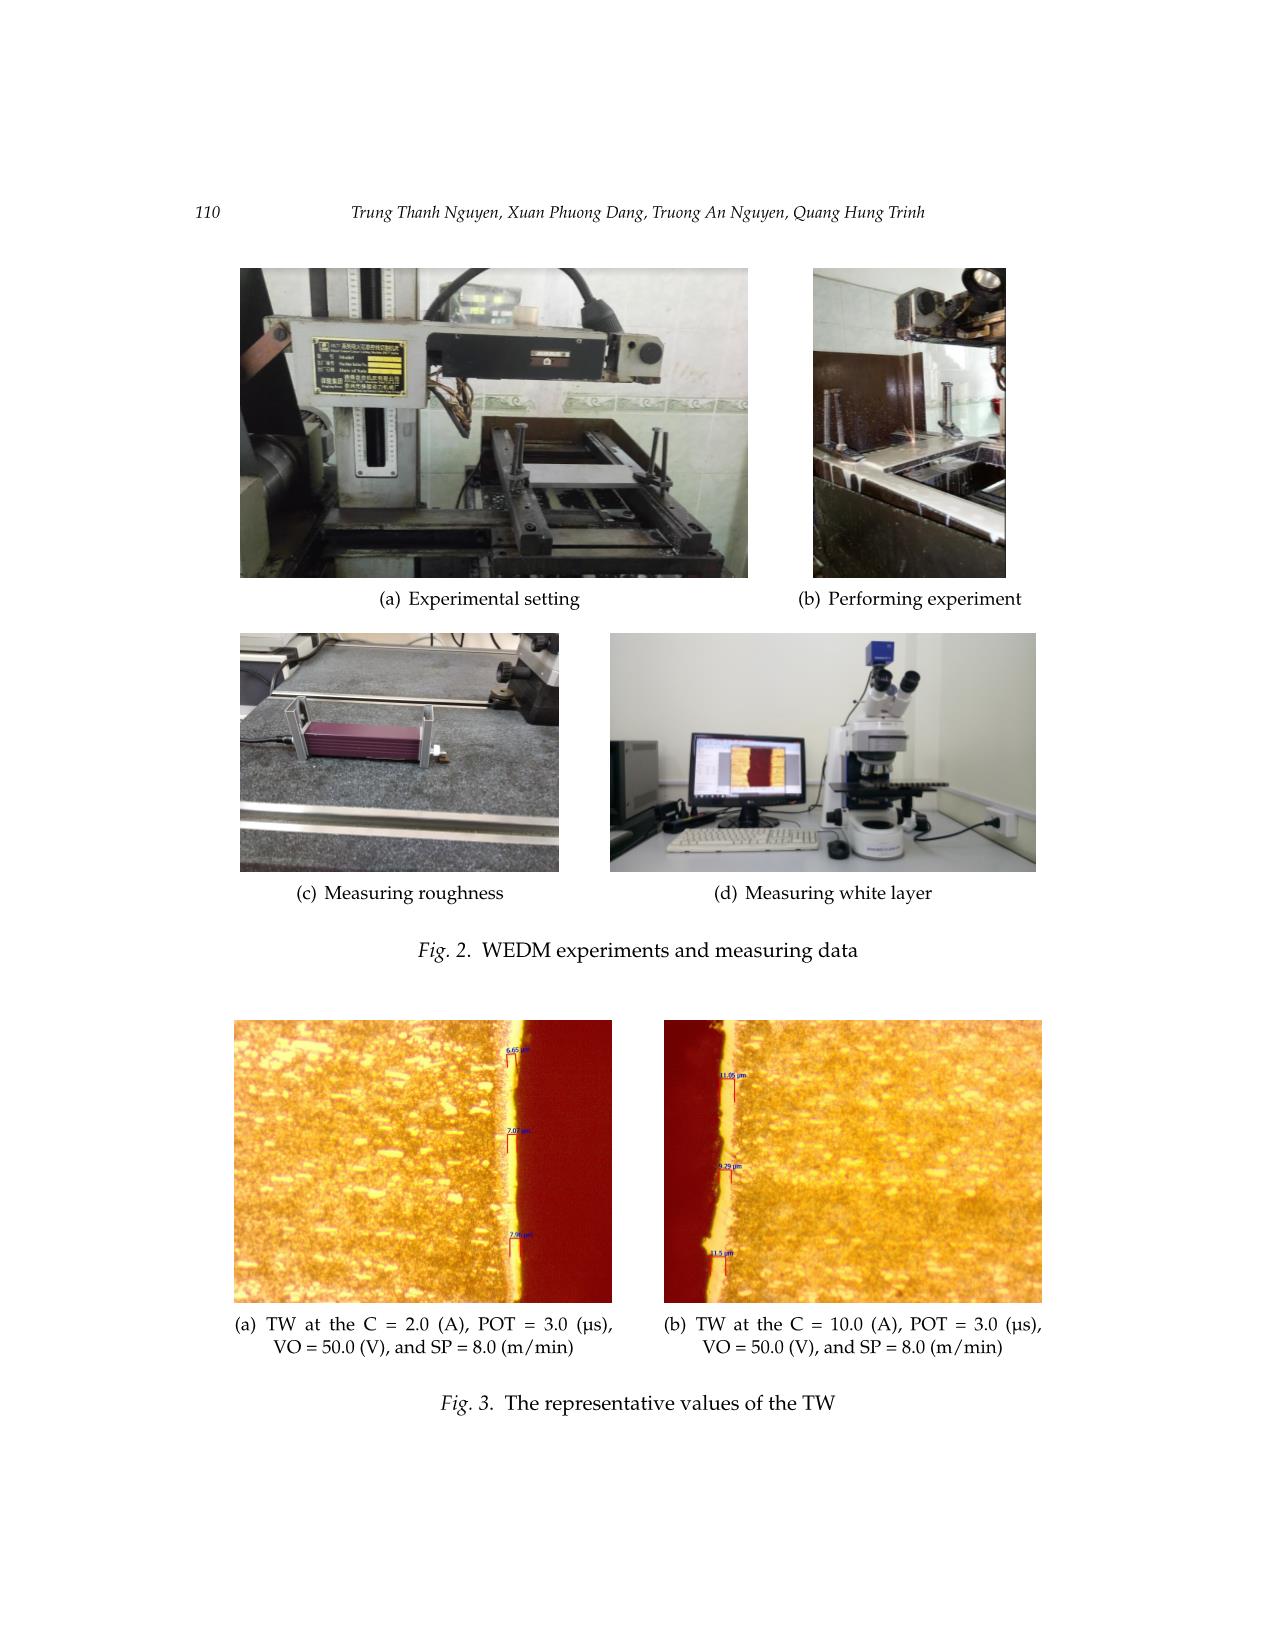 Experiments and optimization for the wedm process: A trade-off analysis between surface quality and production rate trang 6